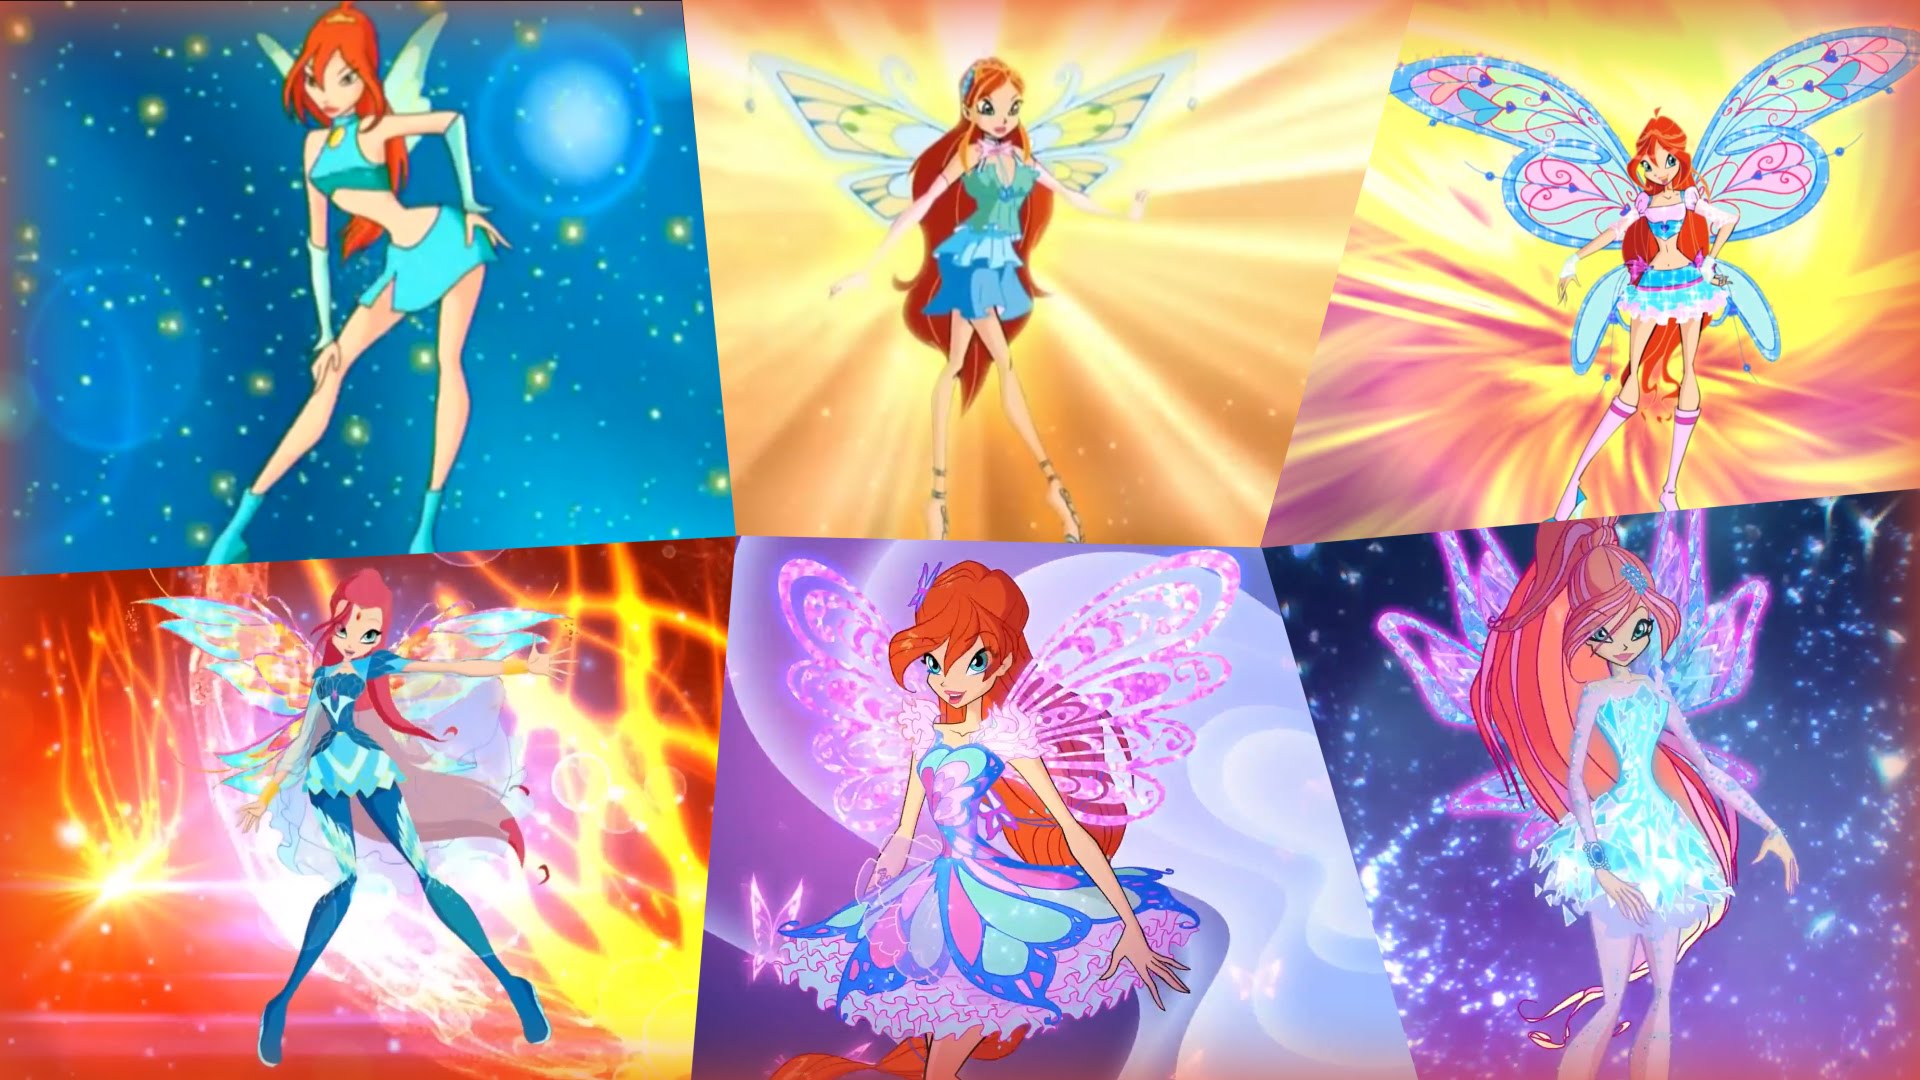 Winx Club - Bloom All Full Transformations up to Tynix! HD! - YouTube